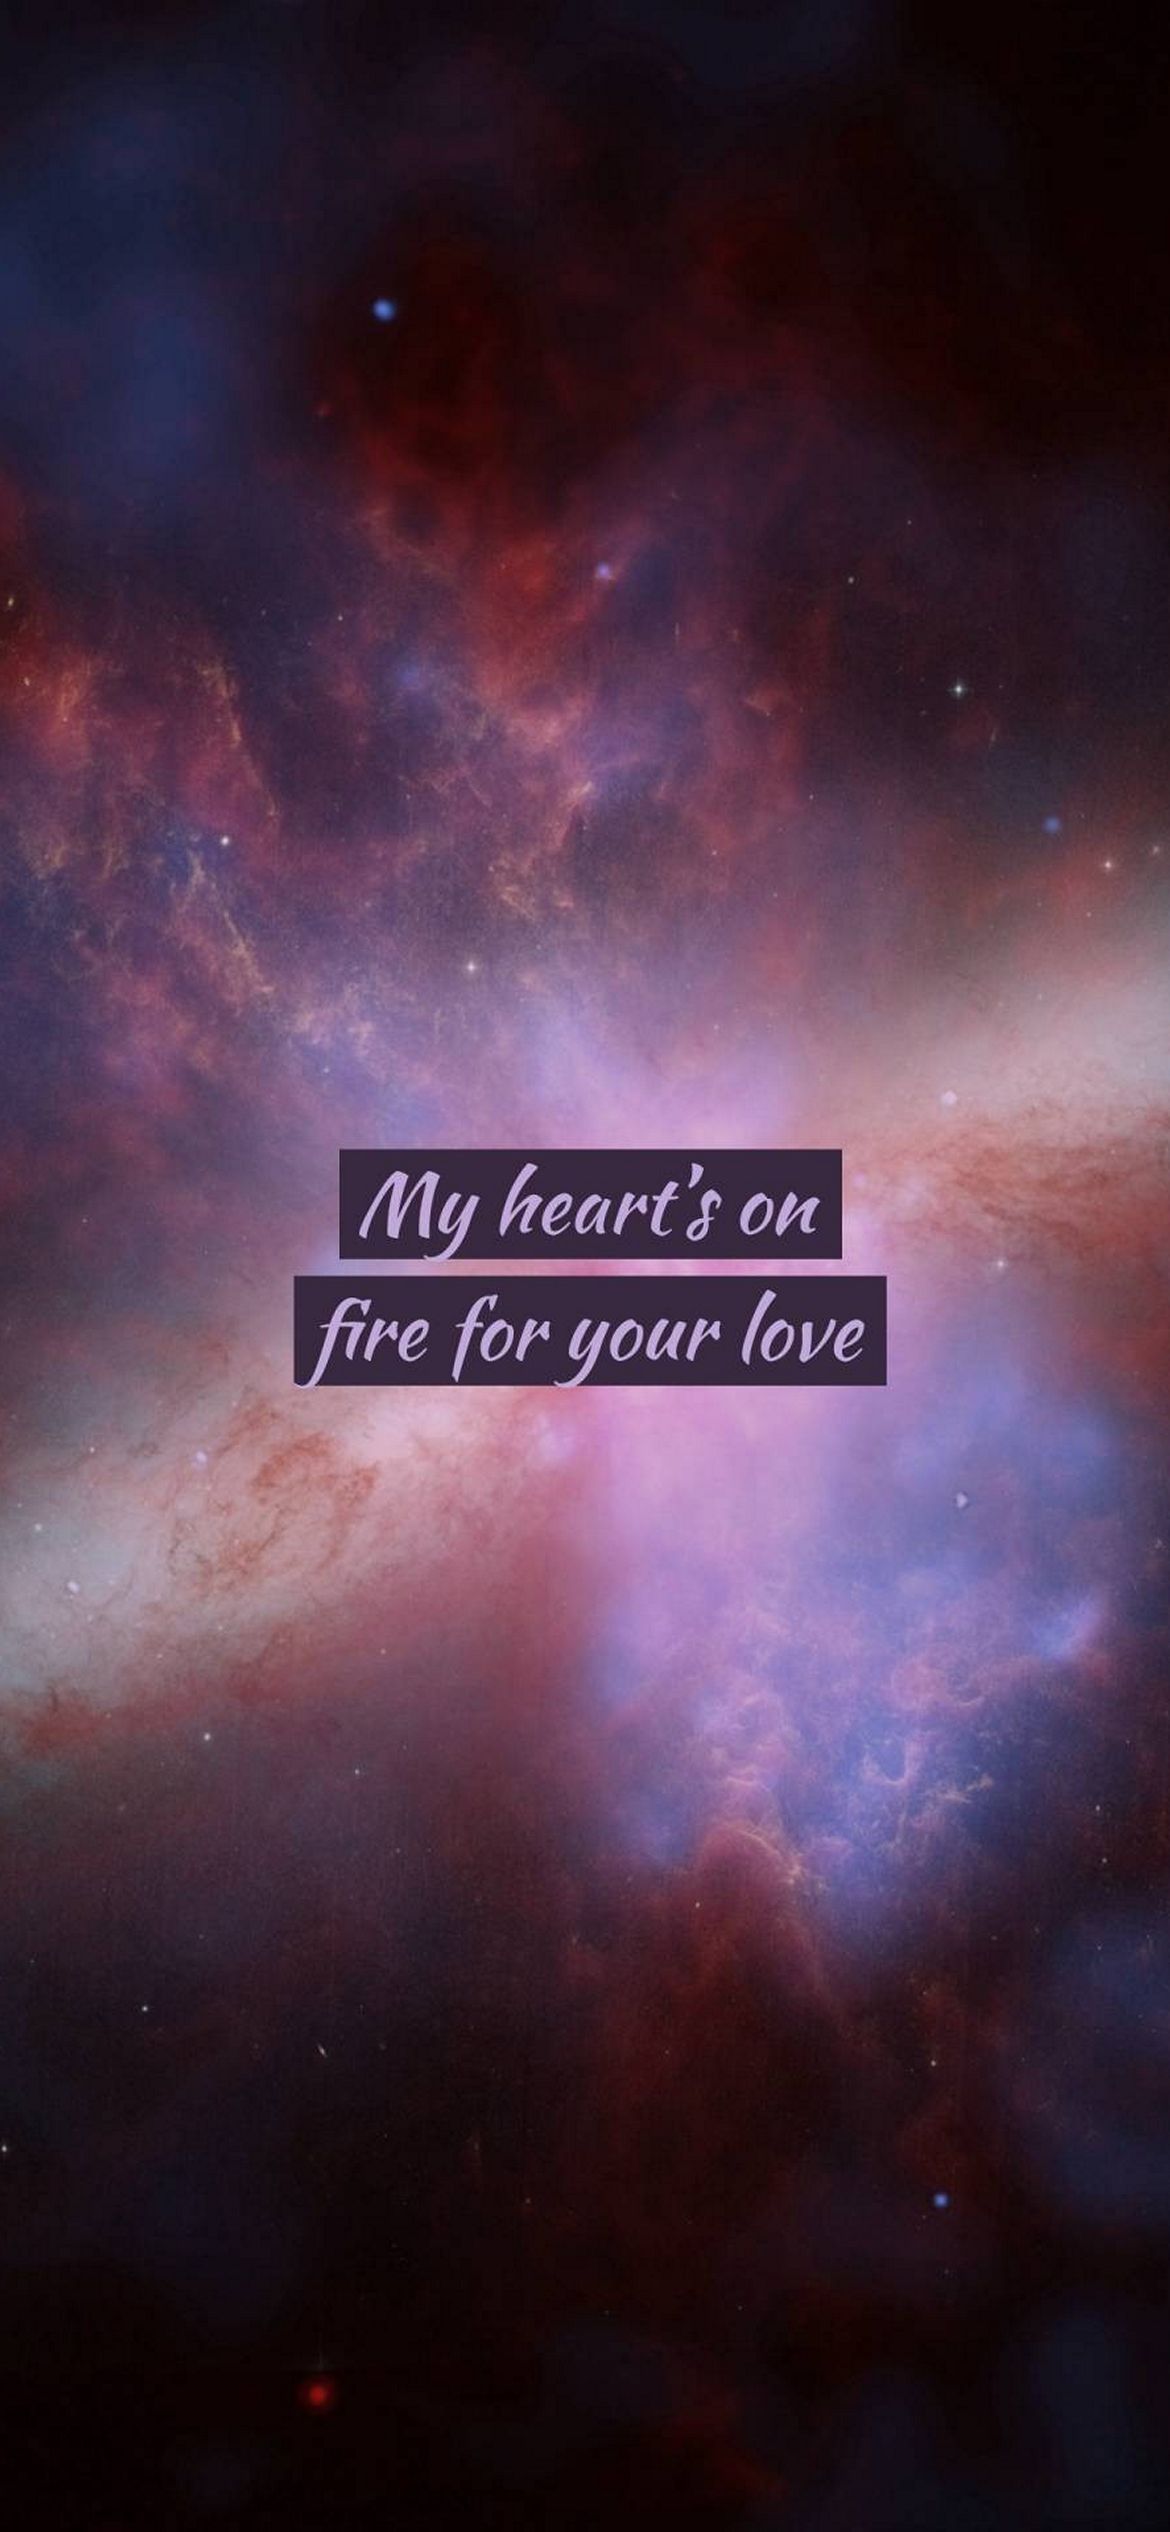 My heart's on fire for your love - Christian iPhone, galaxy